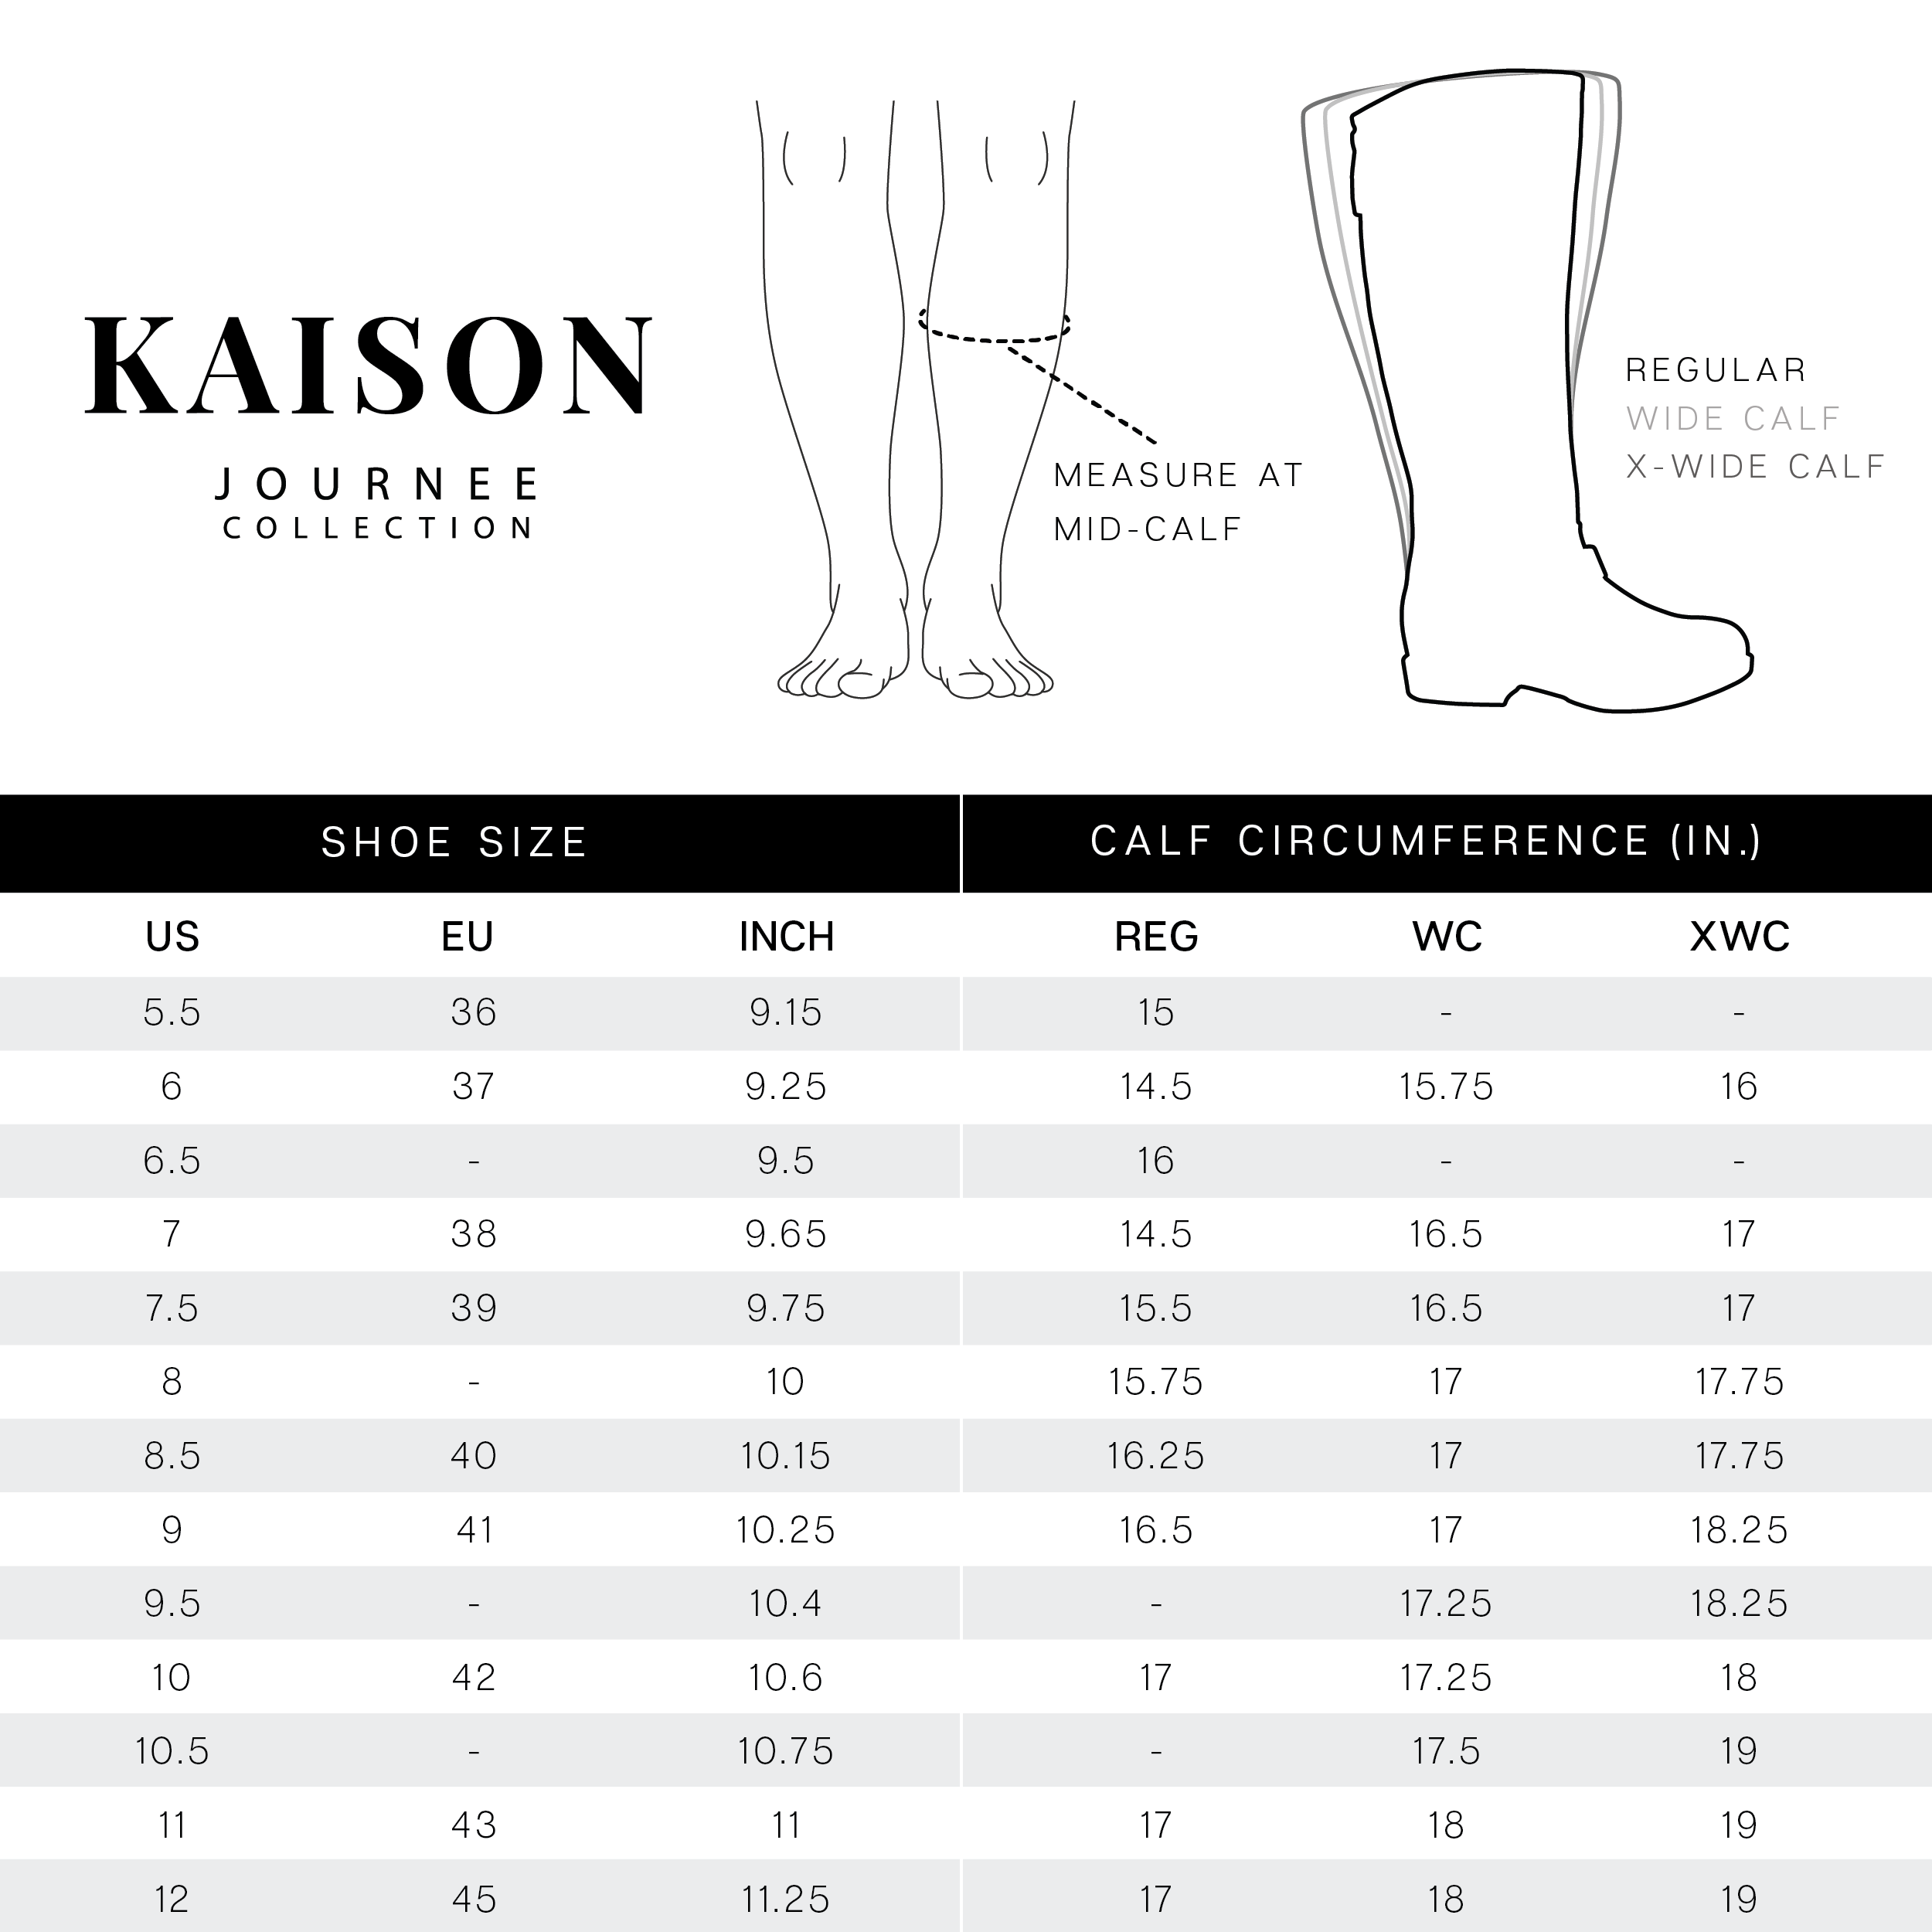 KAISON WIDE CALF - Journee Collection